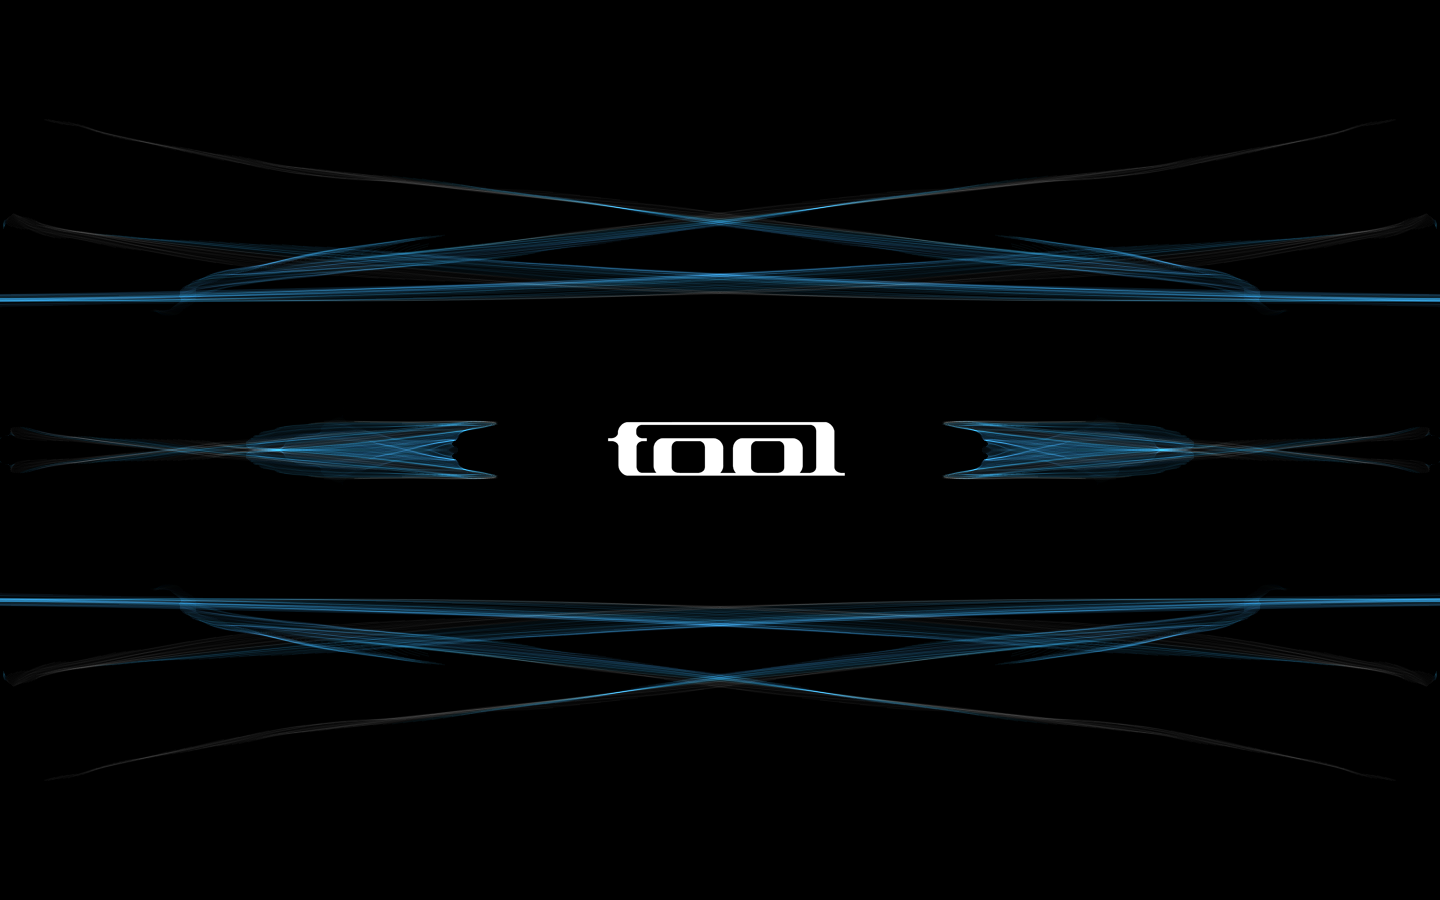 Tool Picture by VTX